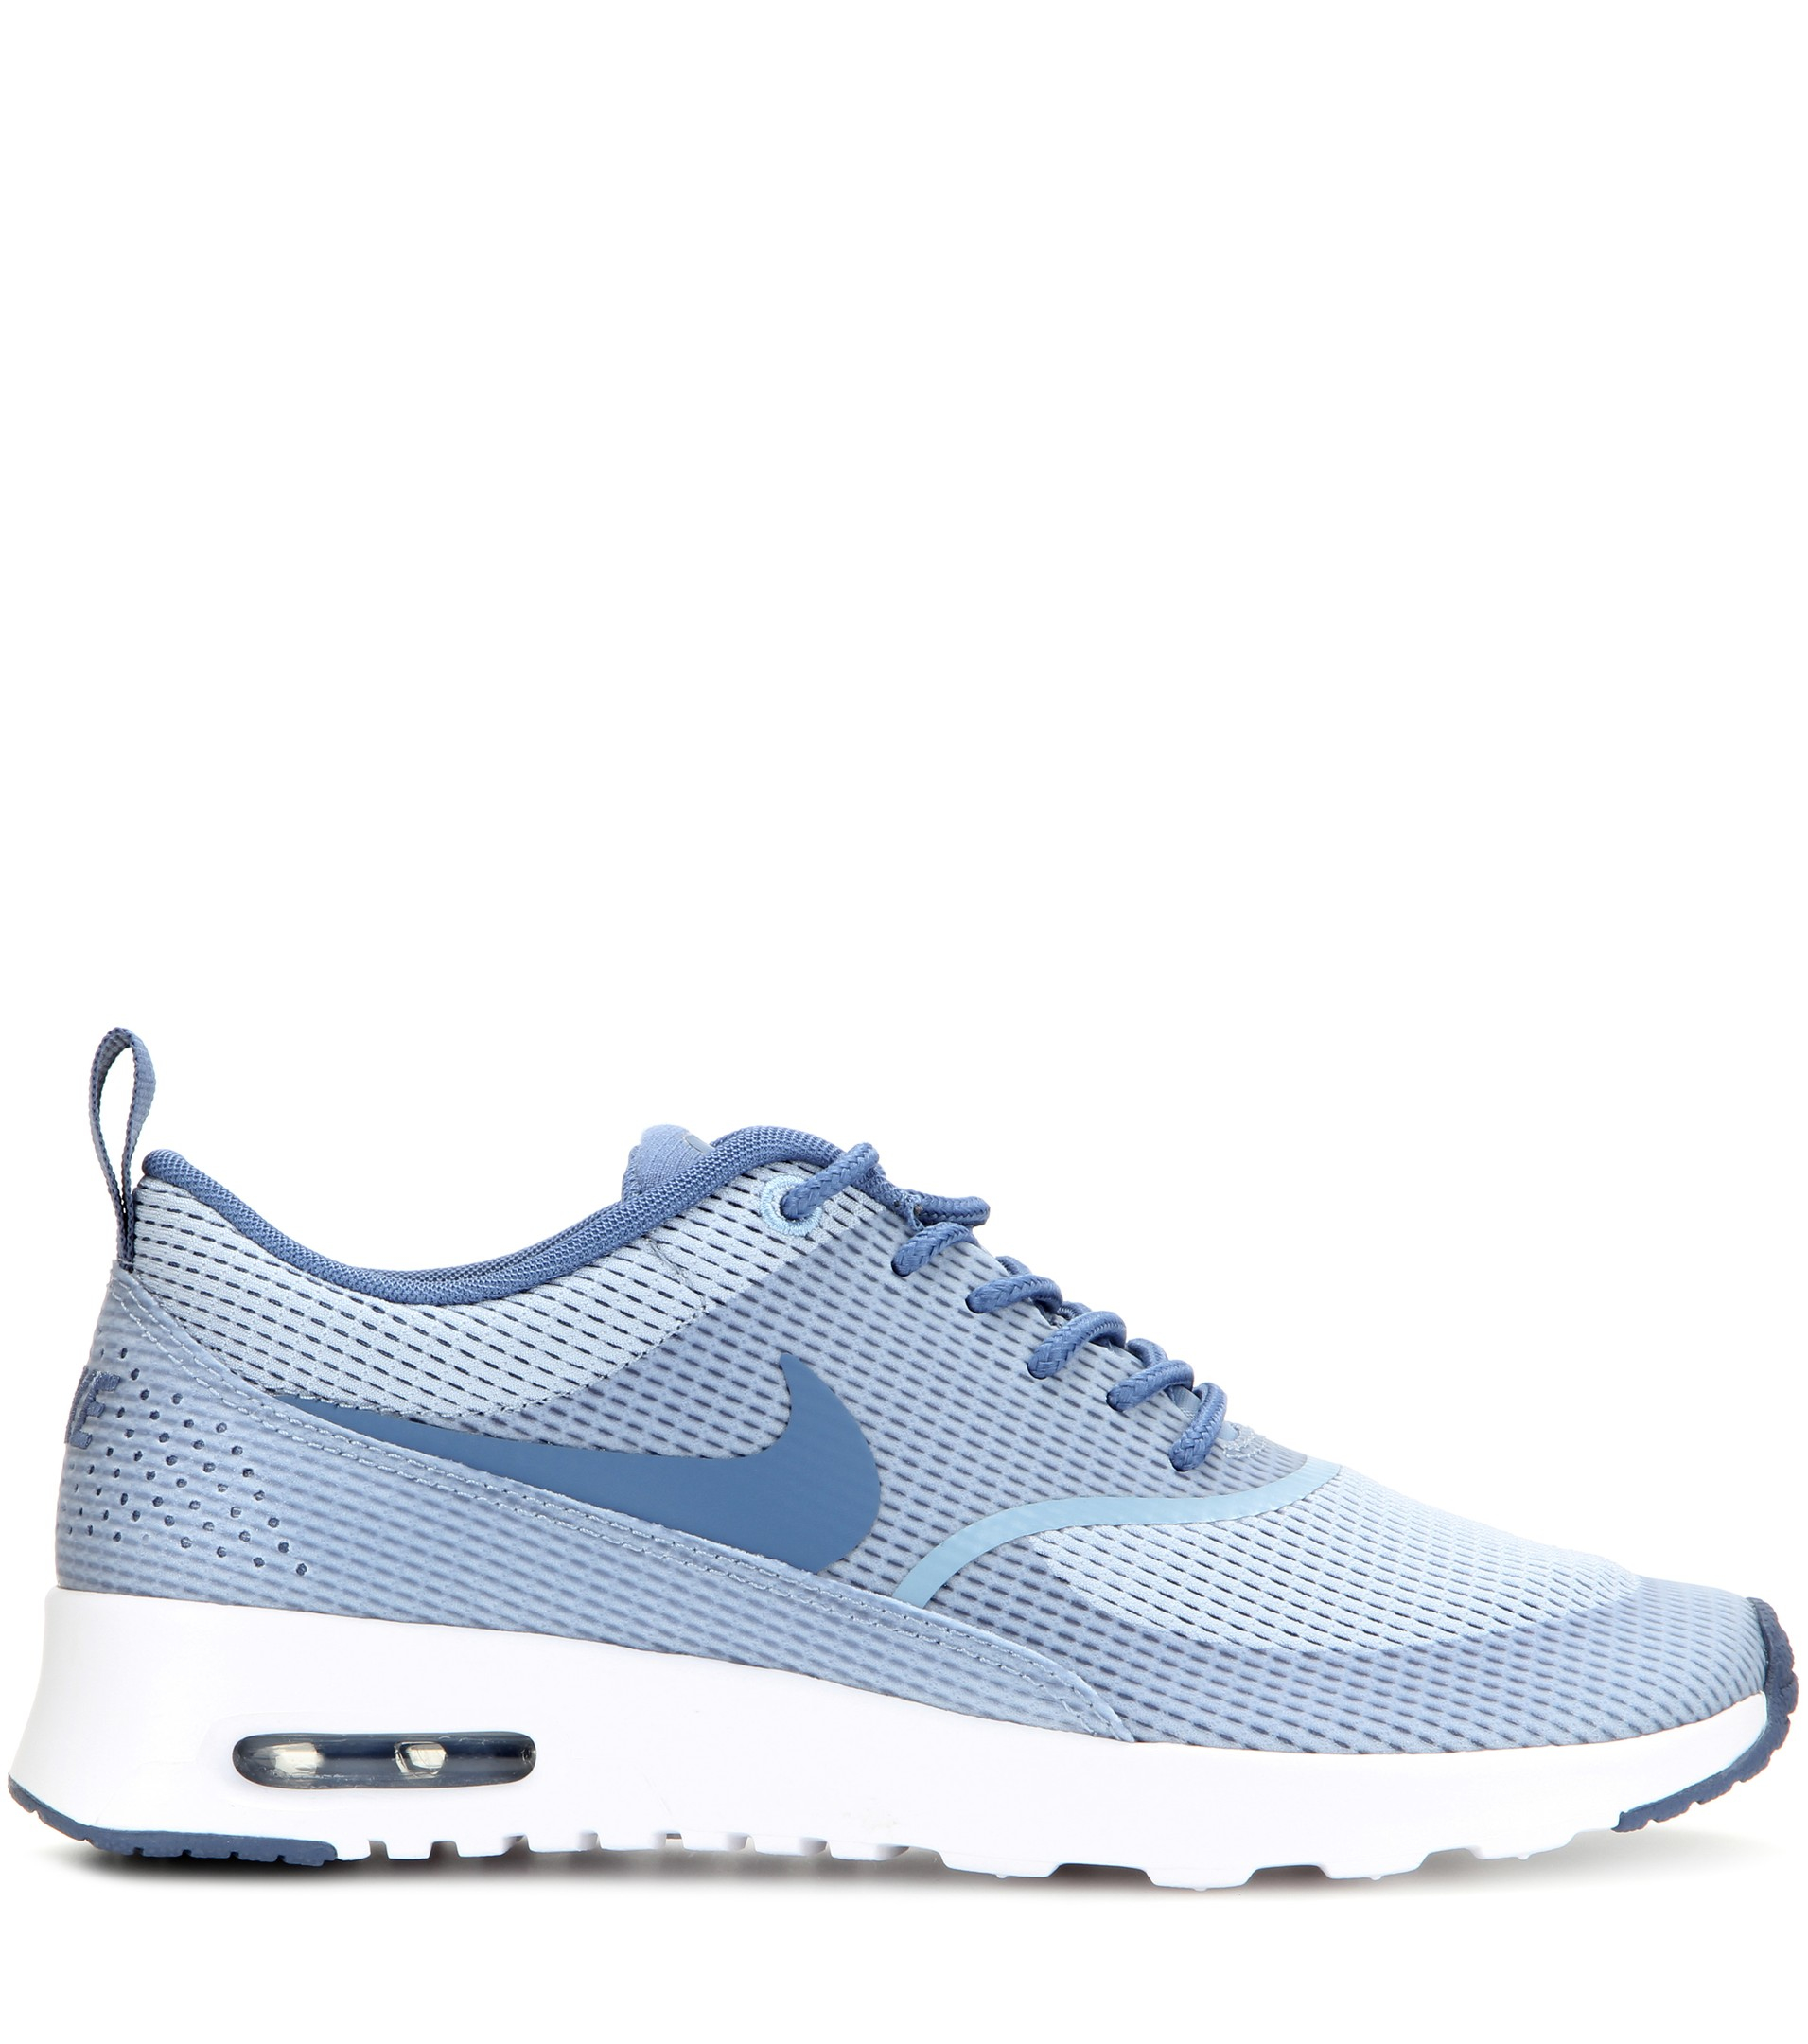 Nike Air Max Thea Txt Sneakers in Blue 